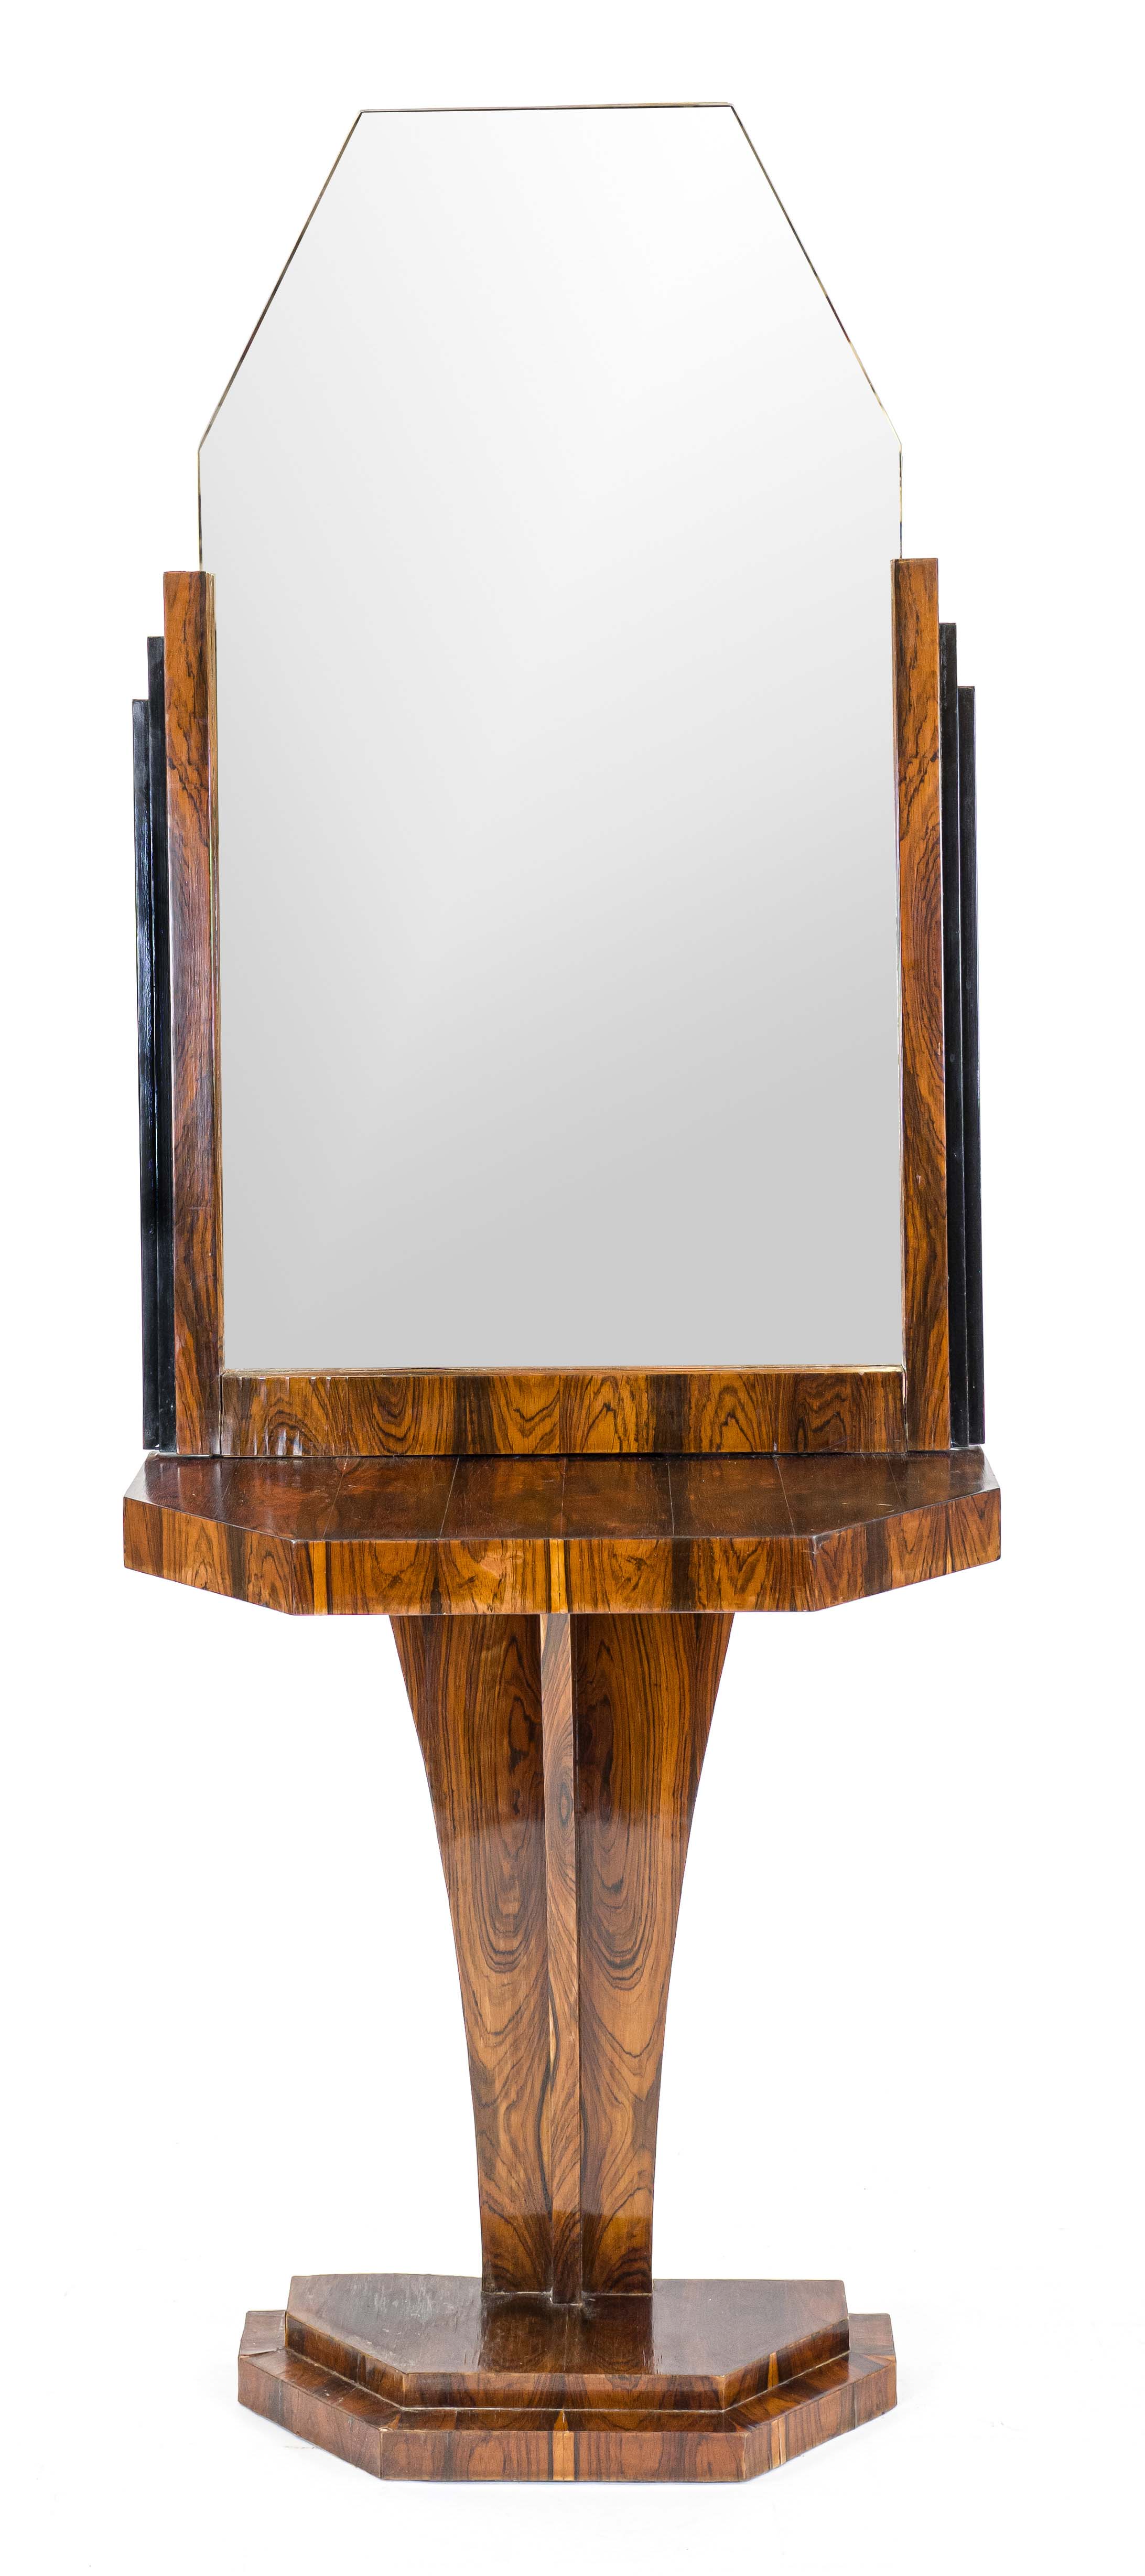 Console table with mirror top in Art Deco style, 20th century, walnut veneered and partly